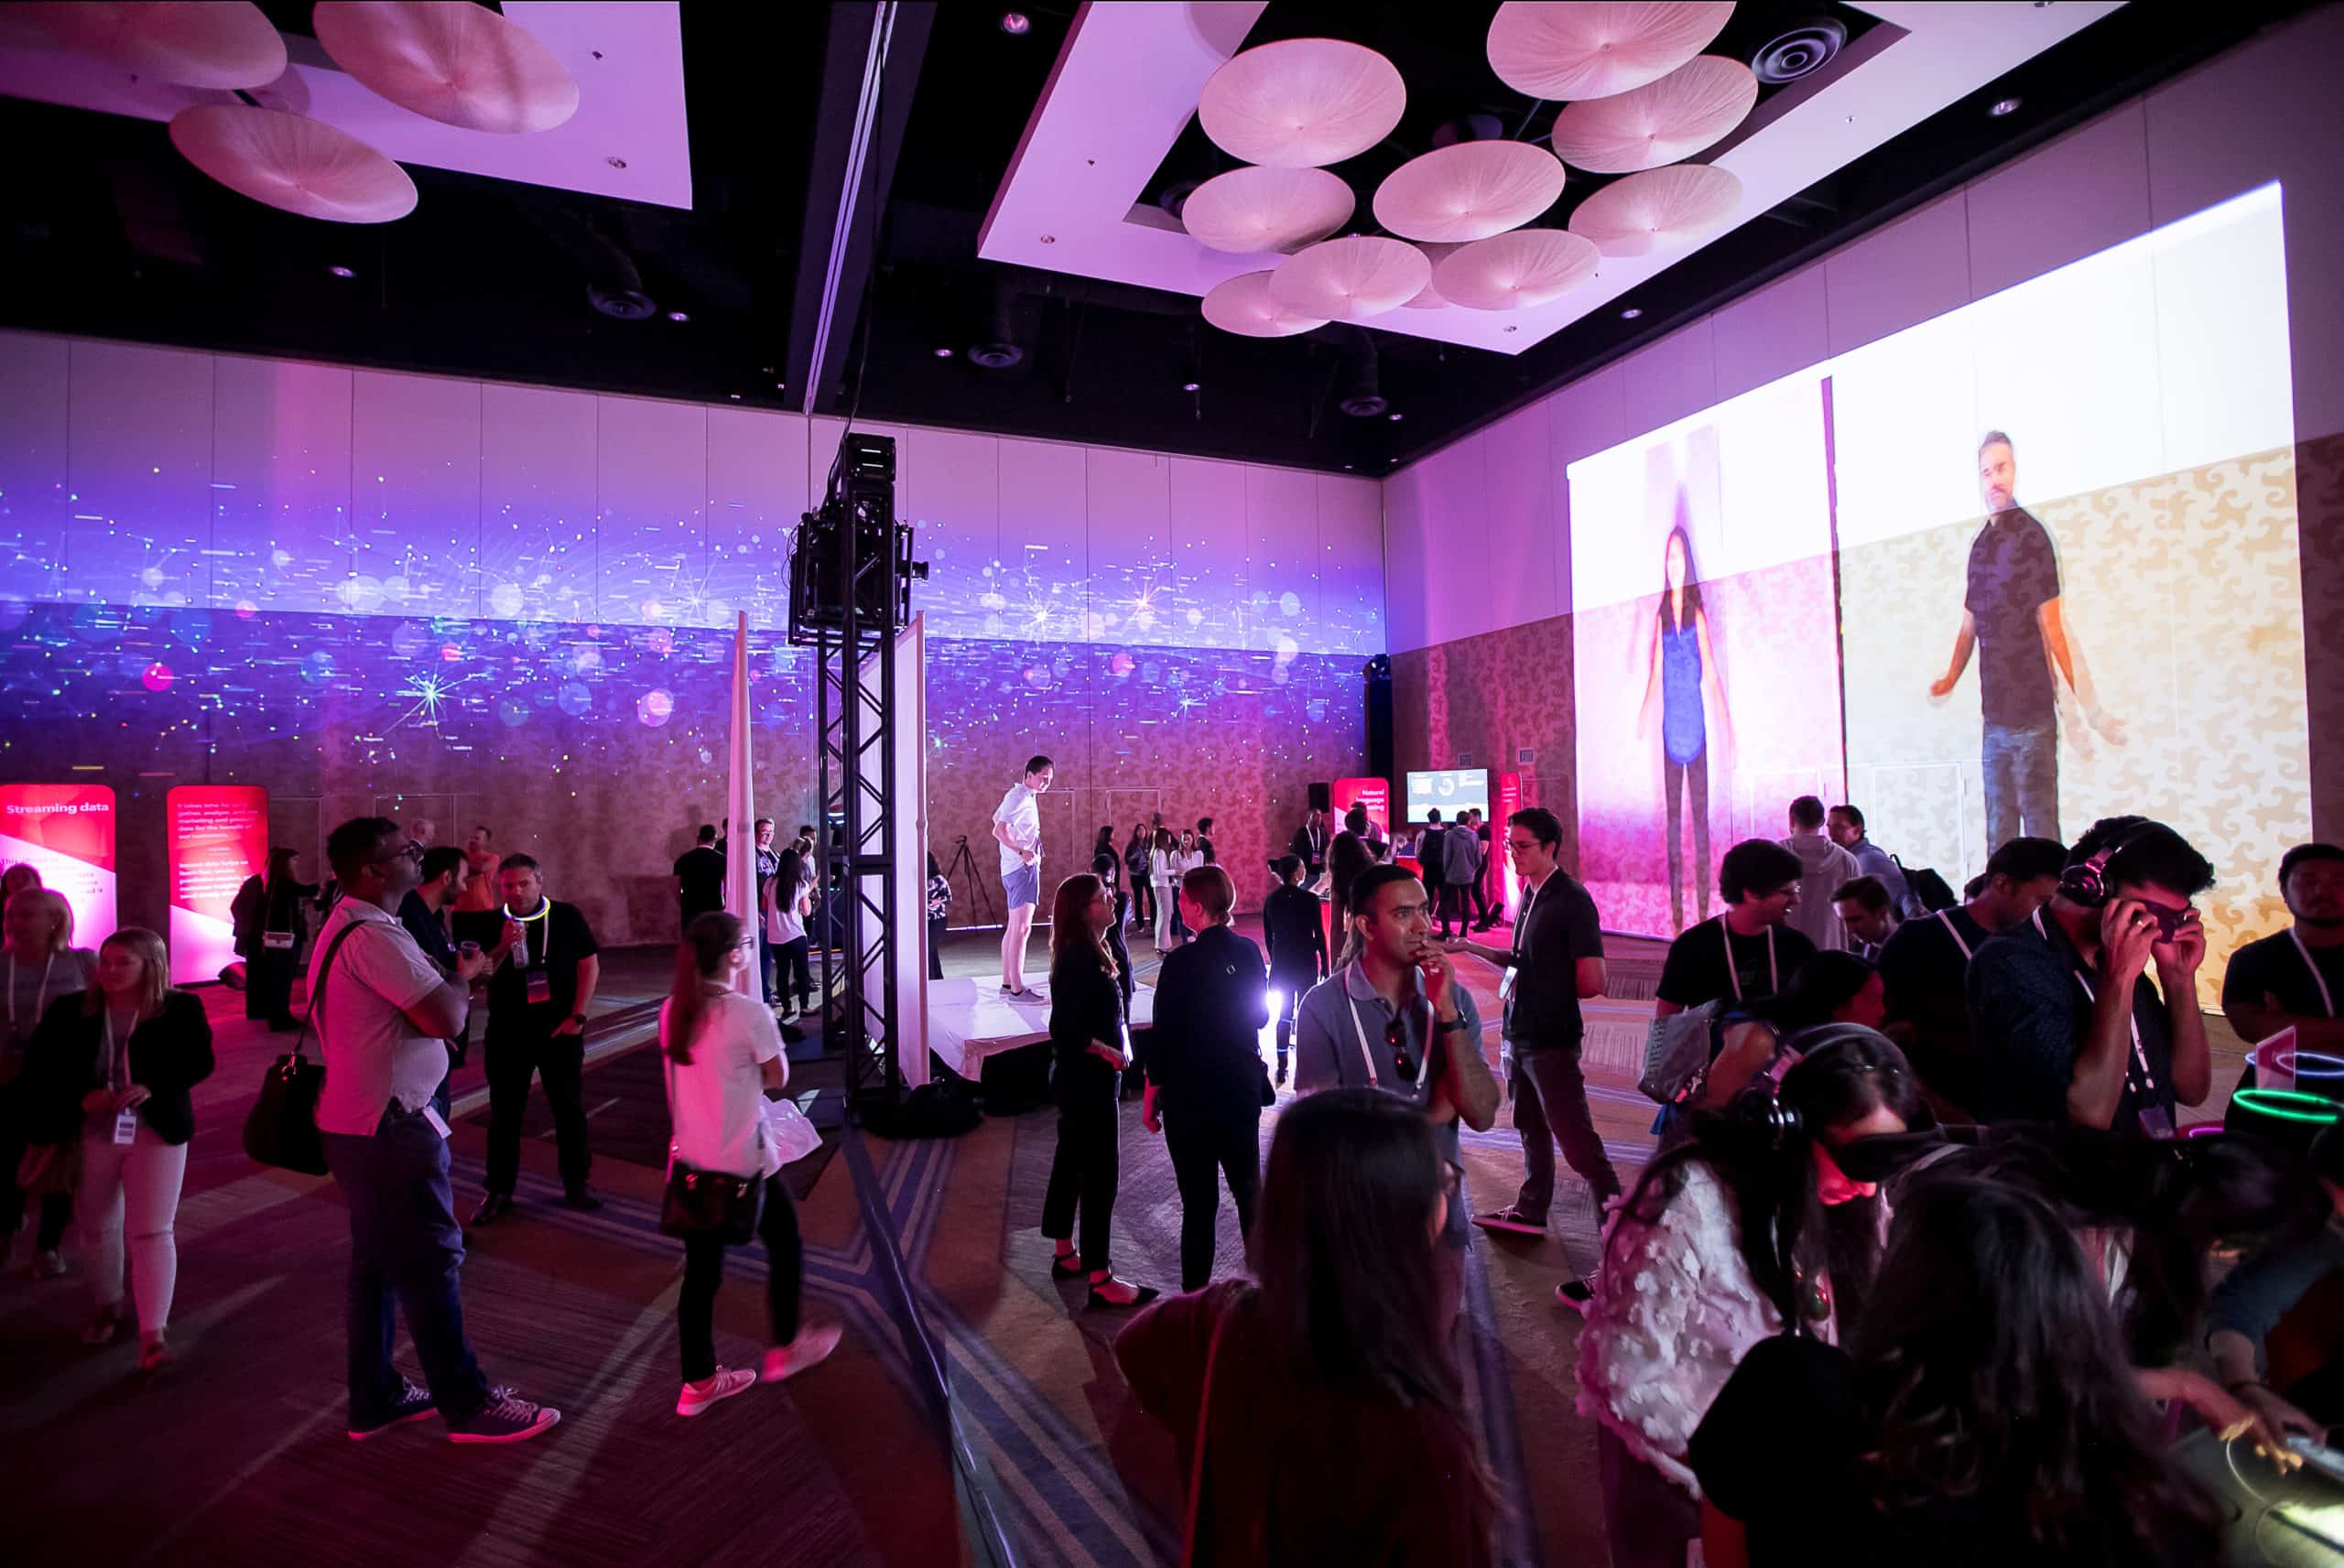 Immersive breakout session area at a financial industry corporate event, showing many attendees interacting with exhibits and networking.